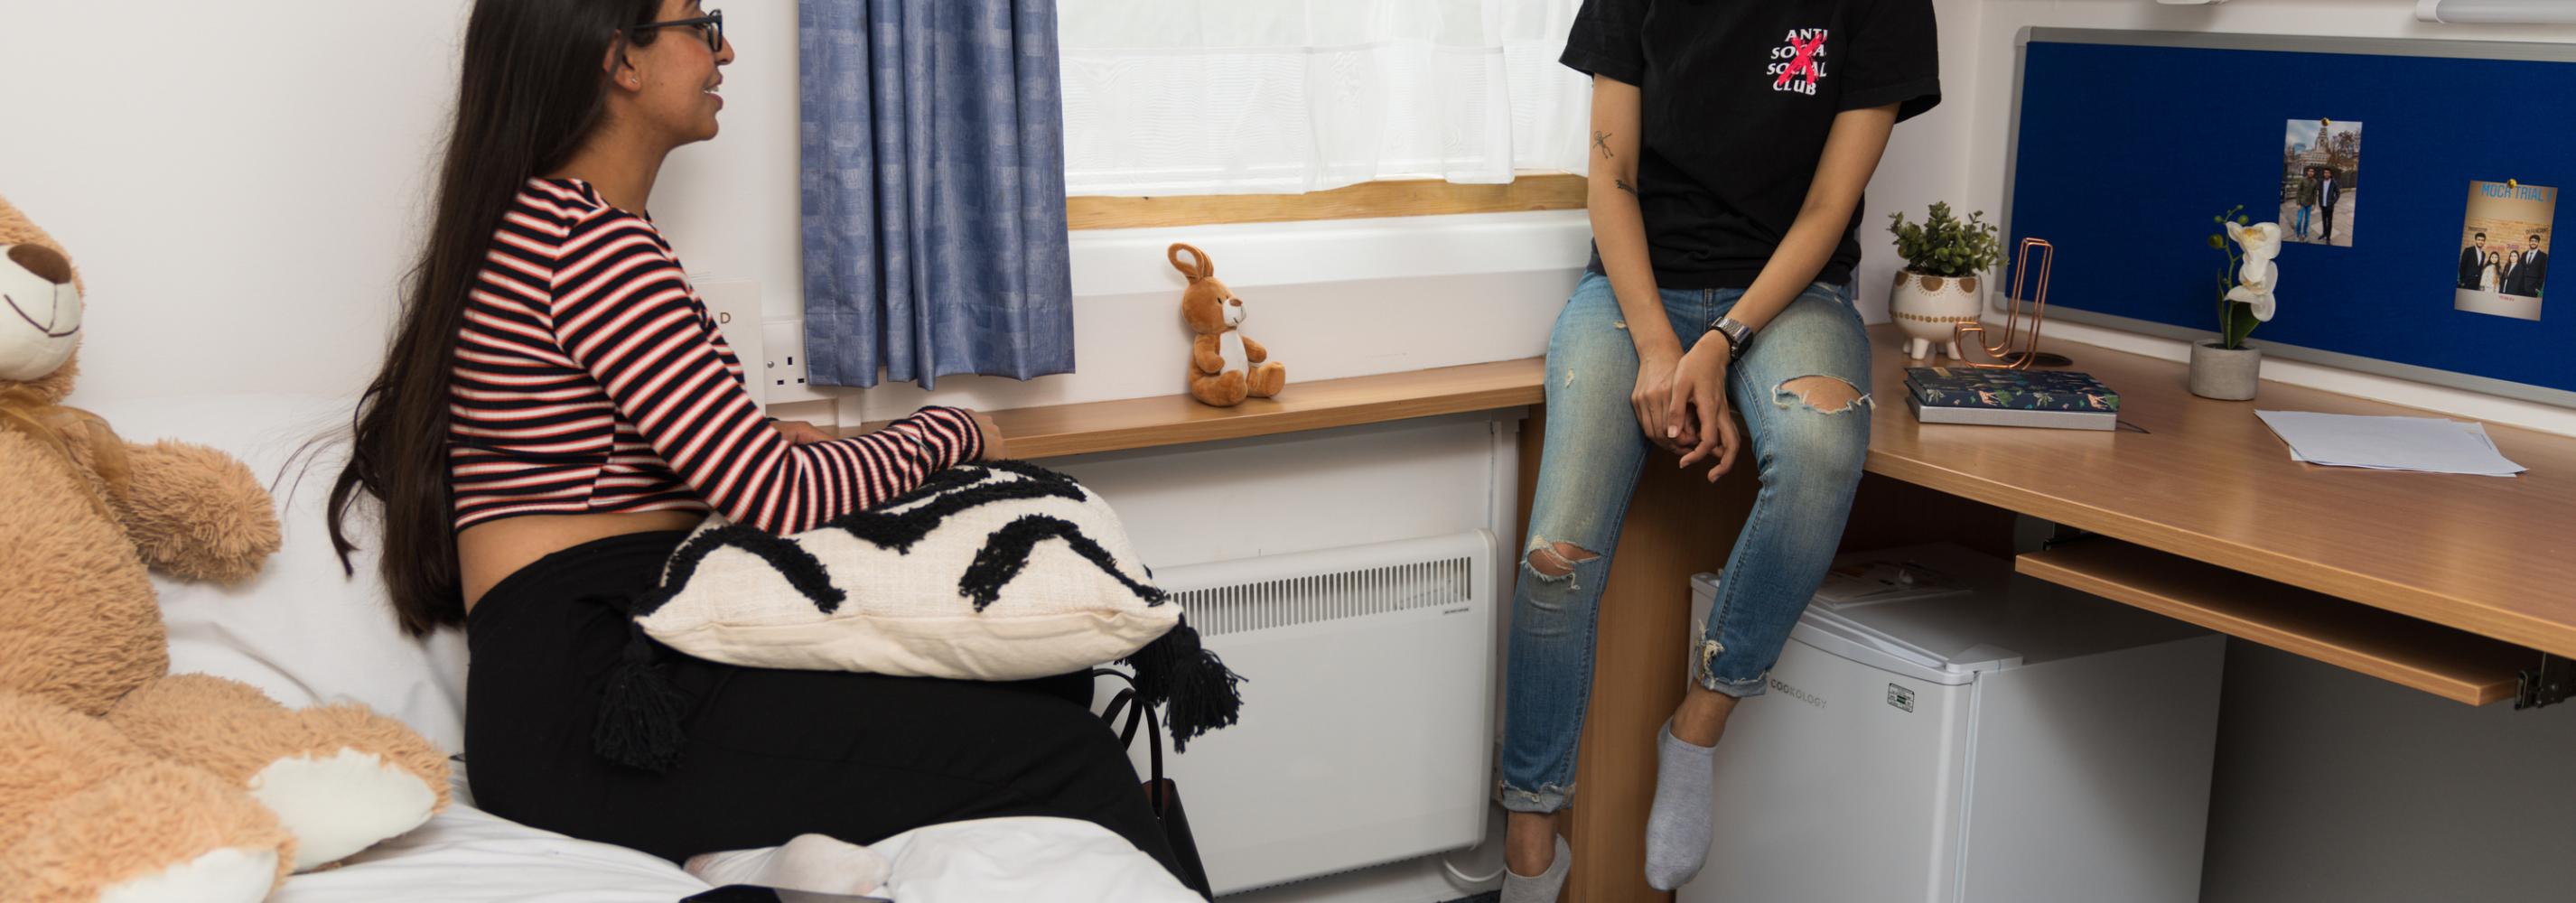 Students chatting in a single ensuite room on the de Havilland campus